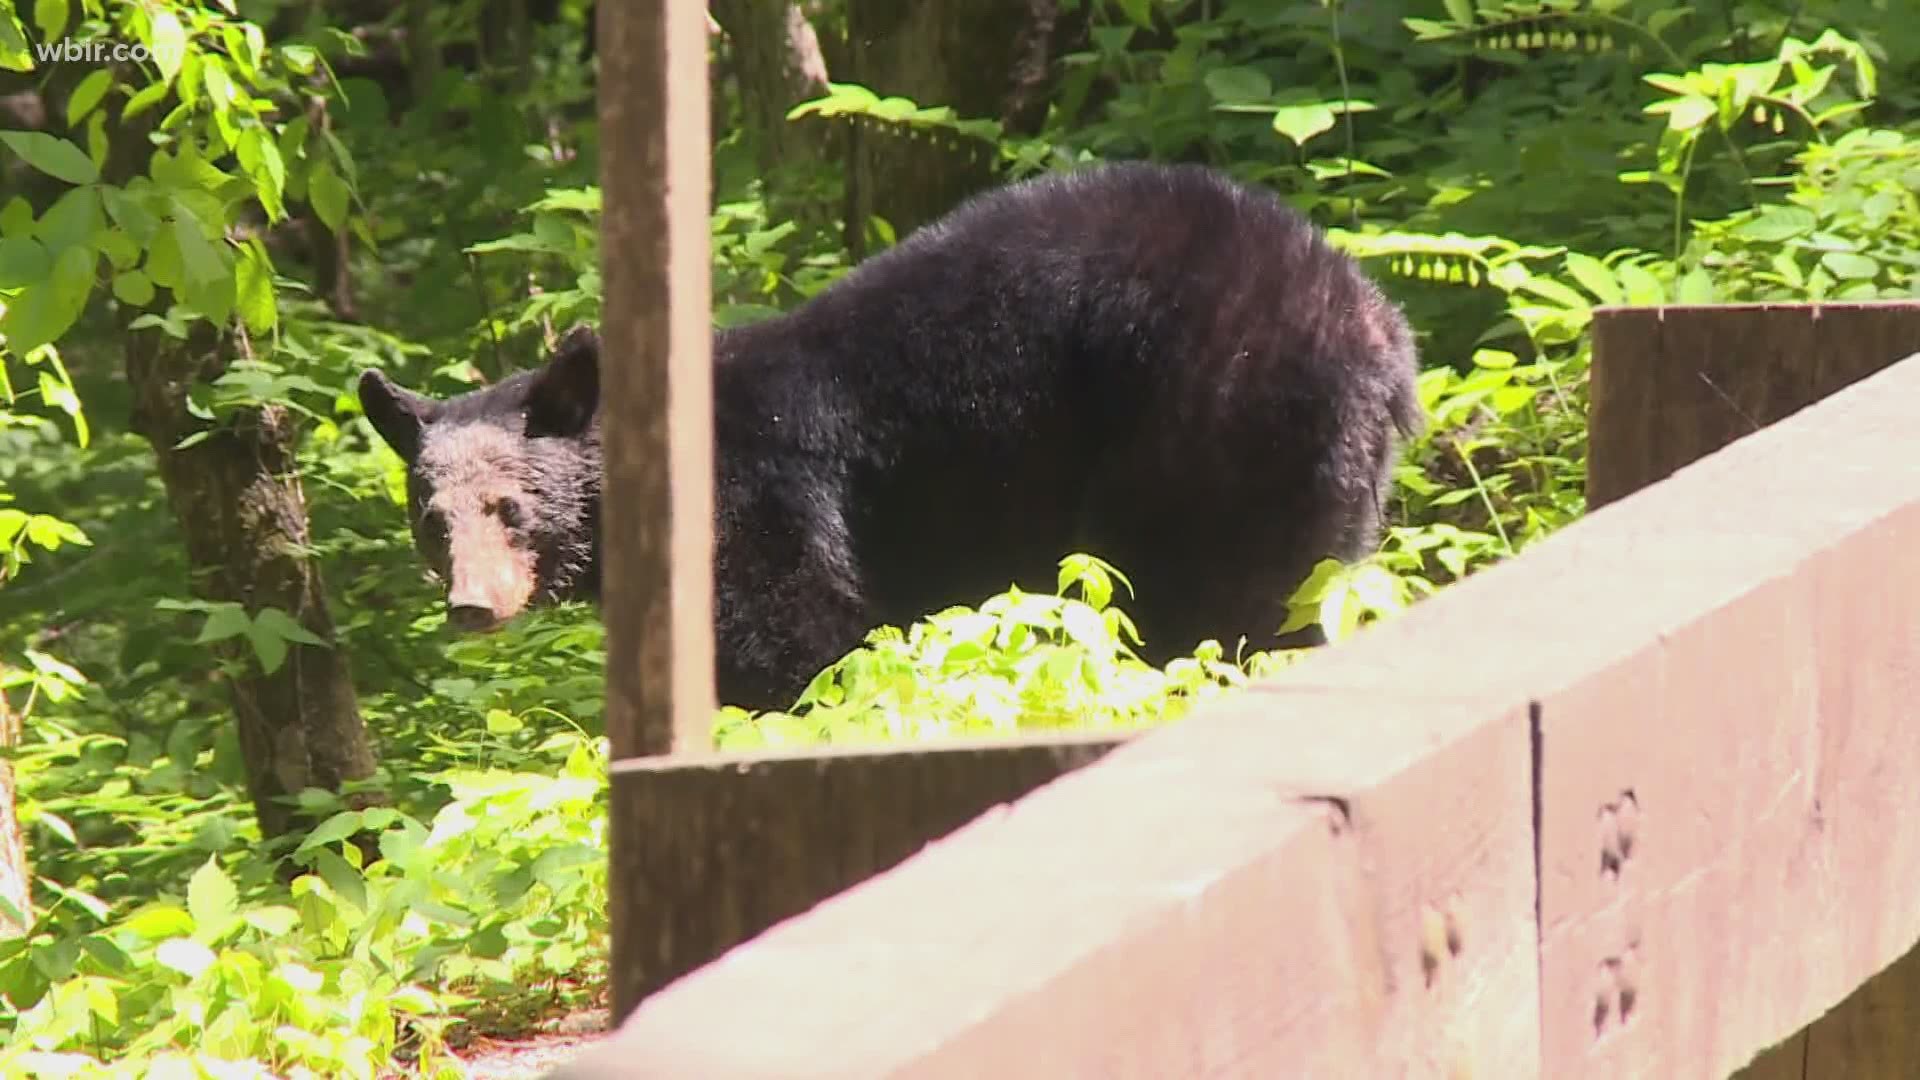 The worst thing you could possibly do' | Rangers issue citation for  visitors that fed a bear peanut butter in Cades Cove 